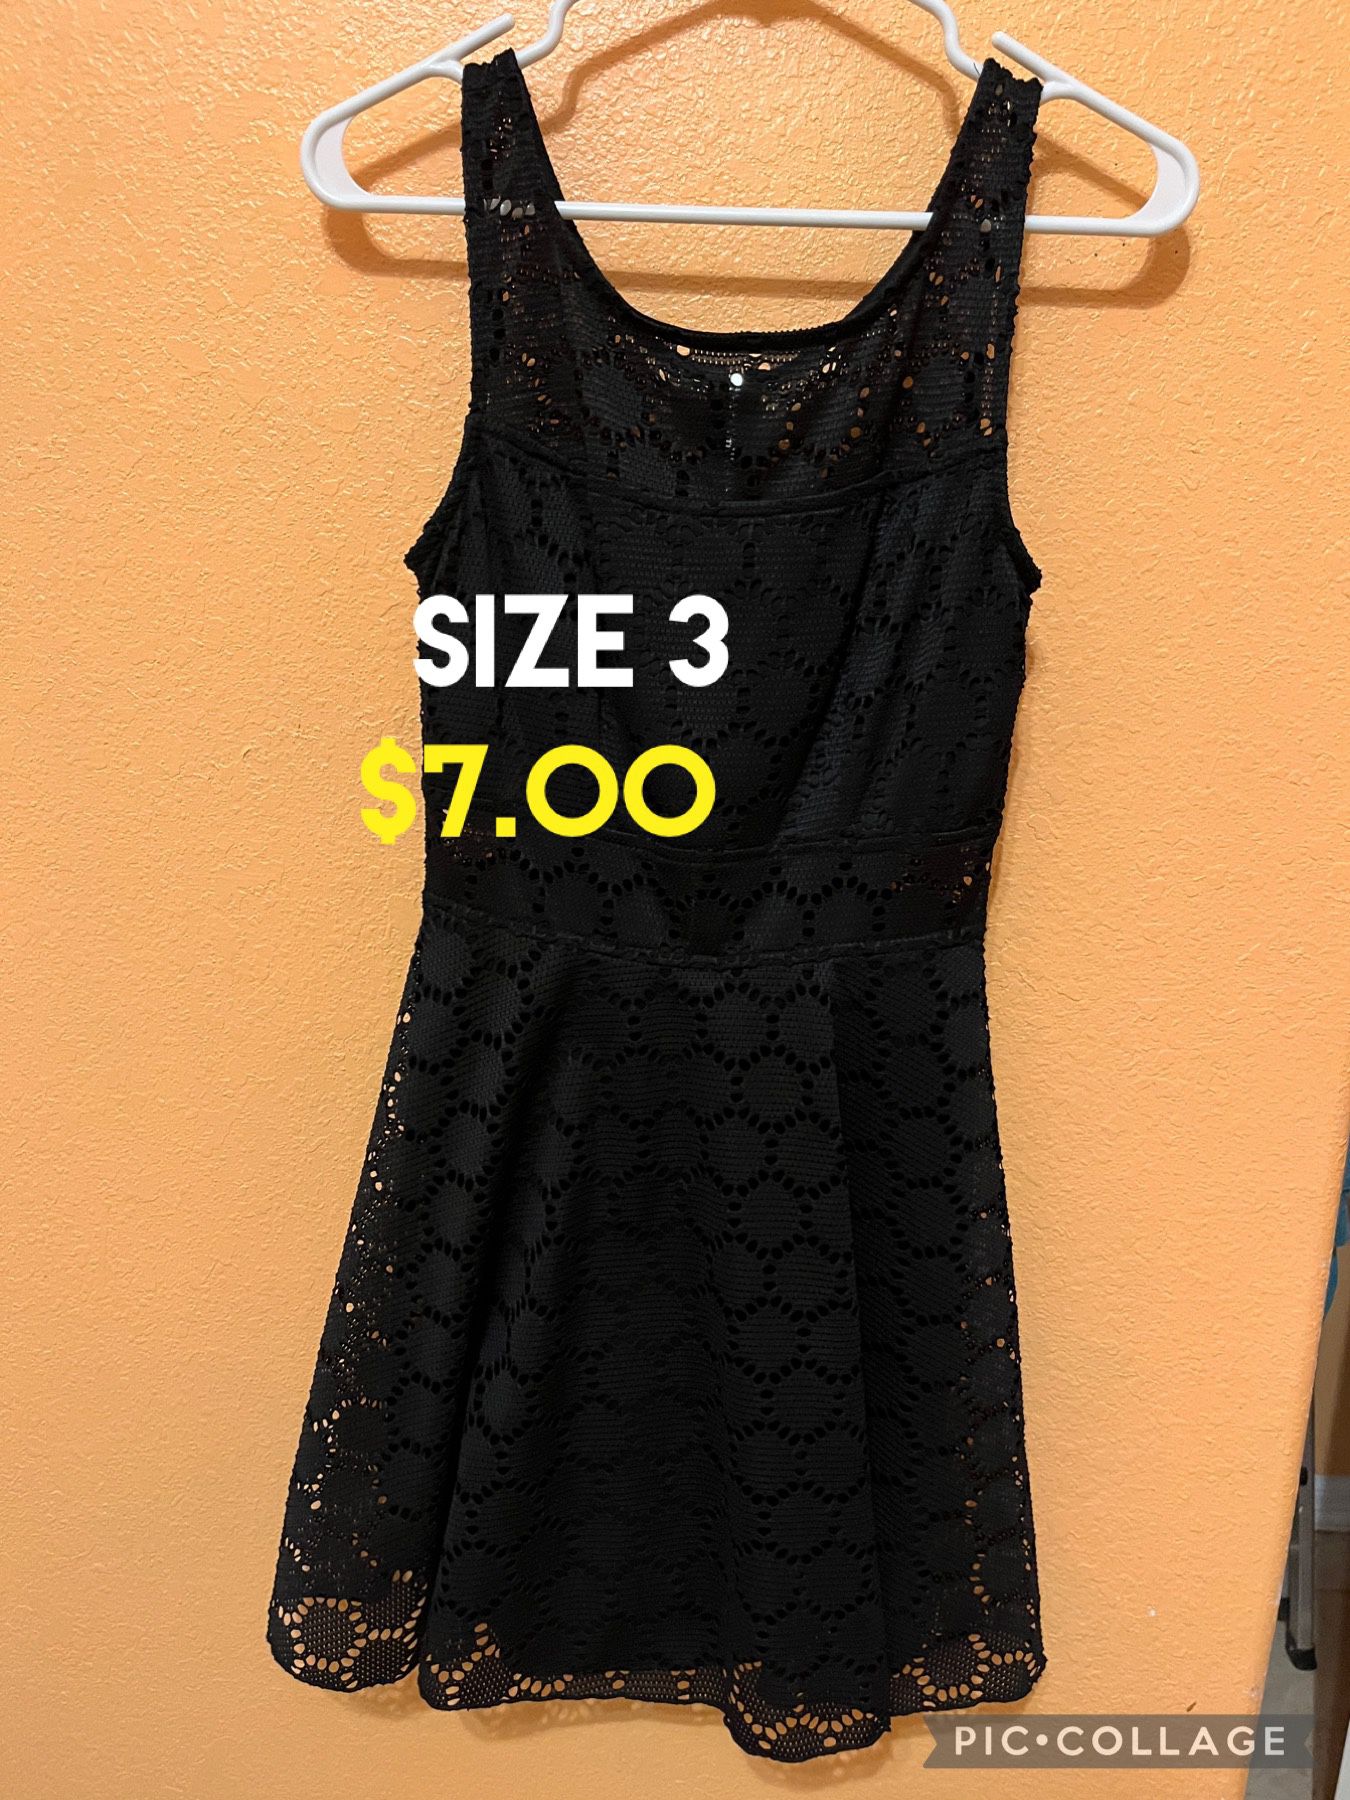 Women’s Dress Size 3 For Sale In San Benito 